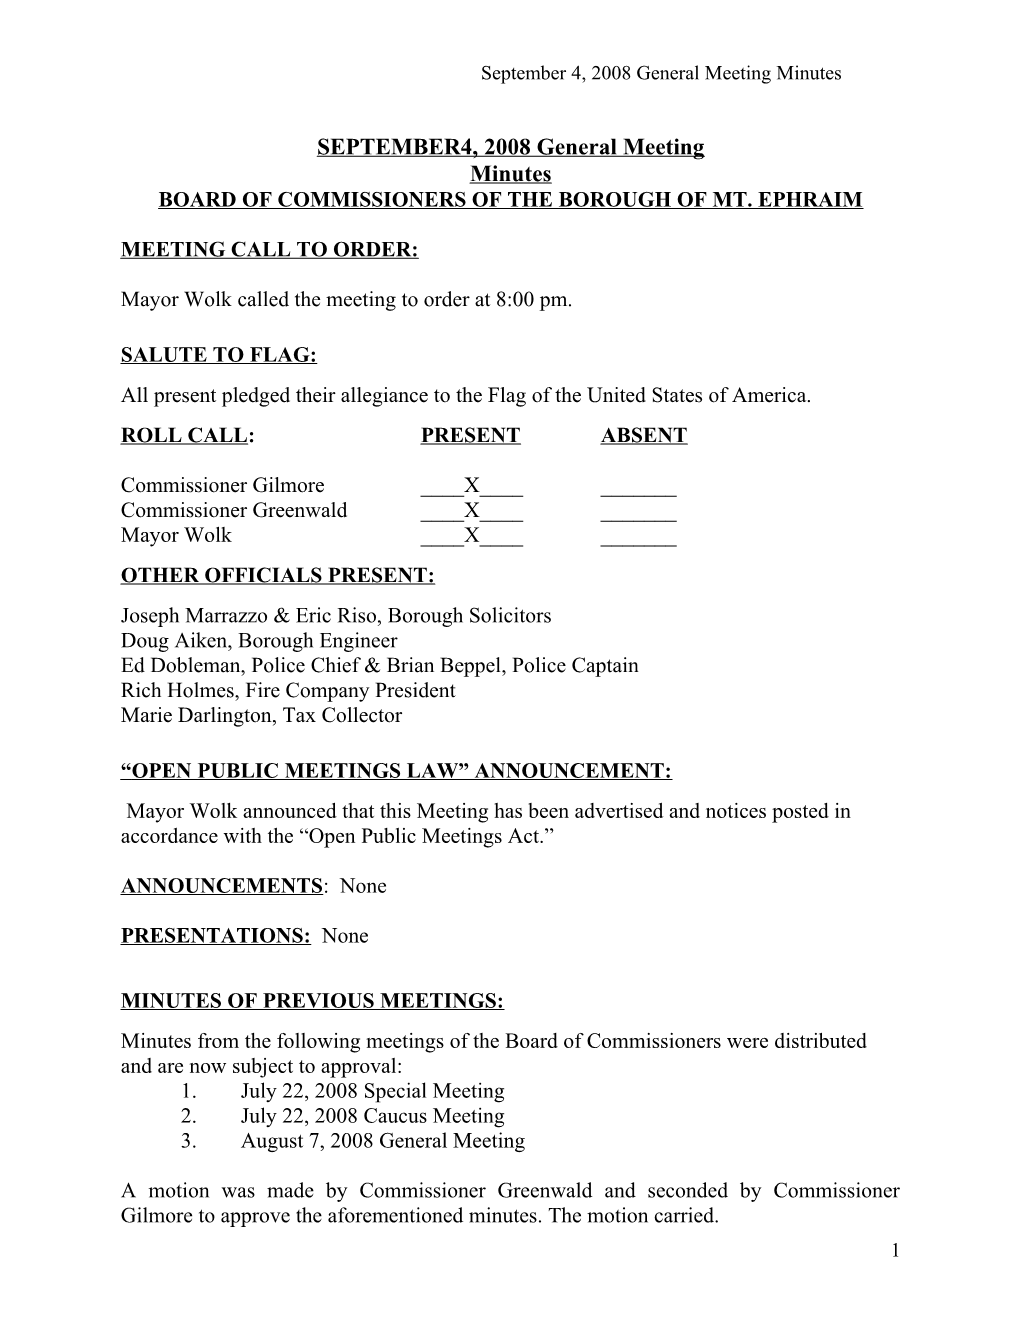 Agenda for the June 5, 2008 General Meeting of the Honorable Board of Commissioners Of s1